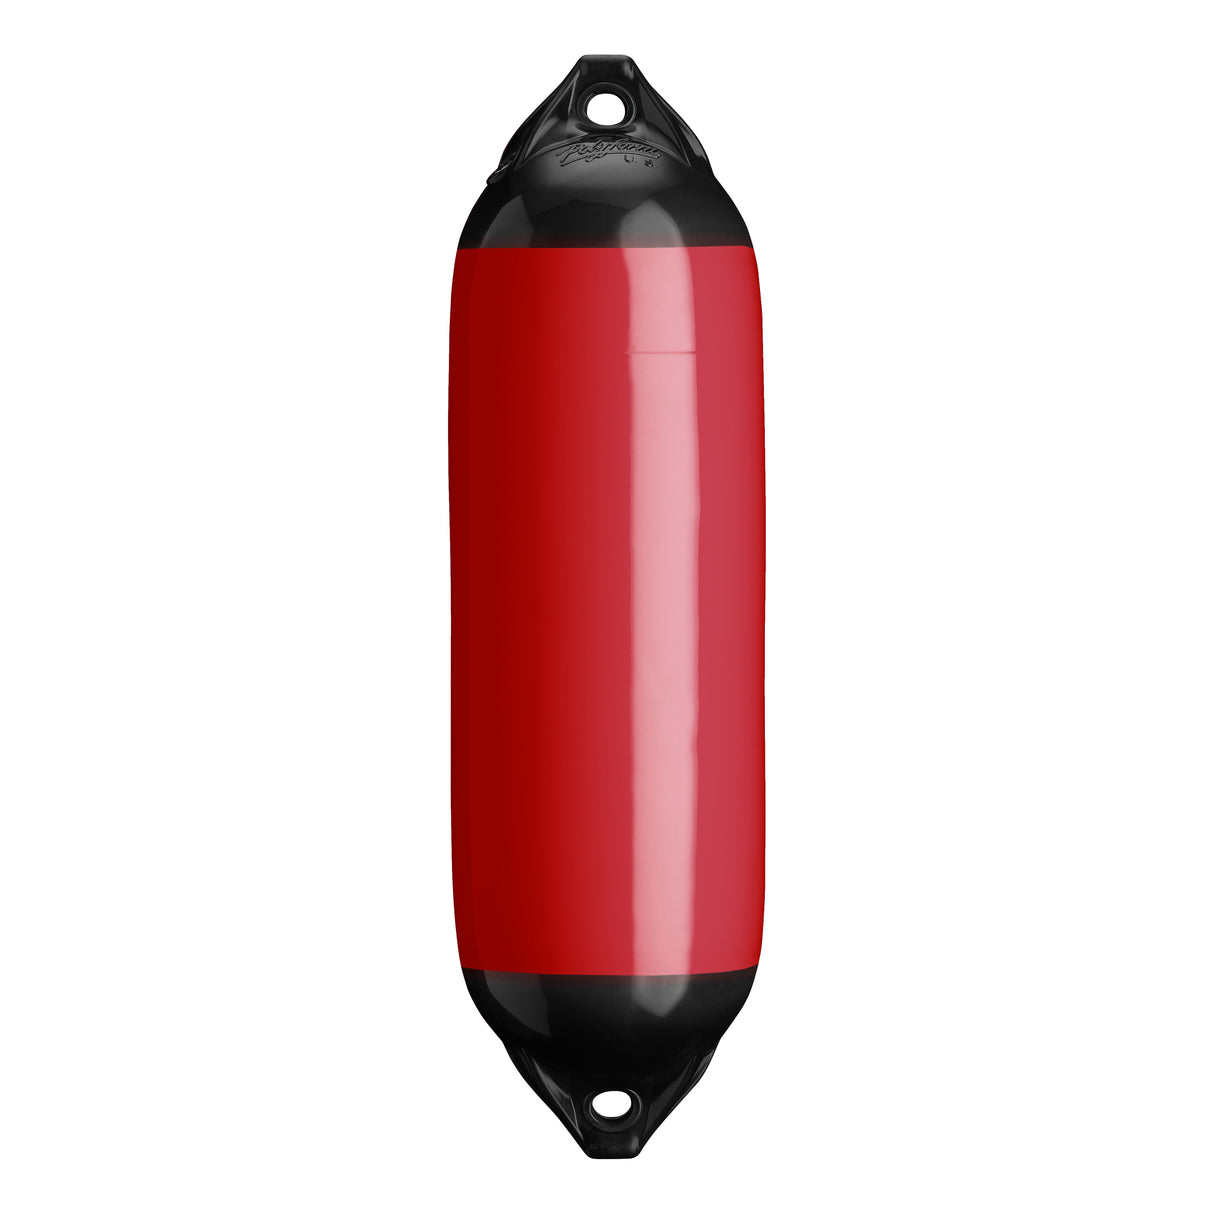 Classic Red boat fender with Black-Top, Polyform F-02 